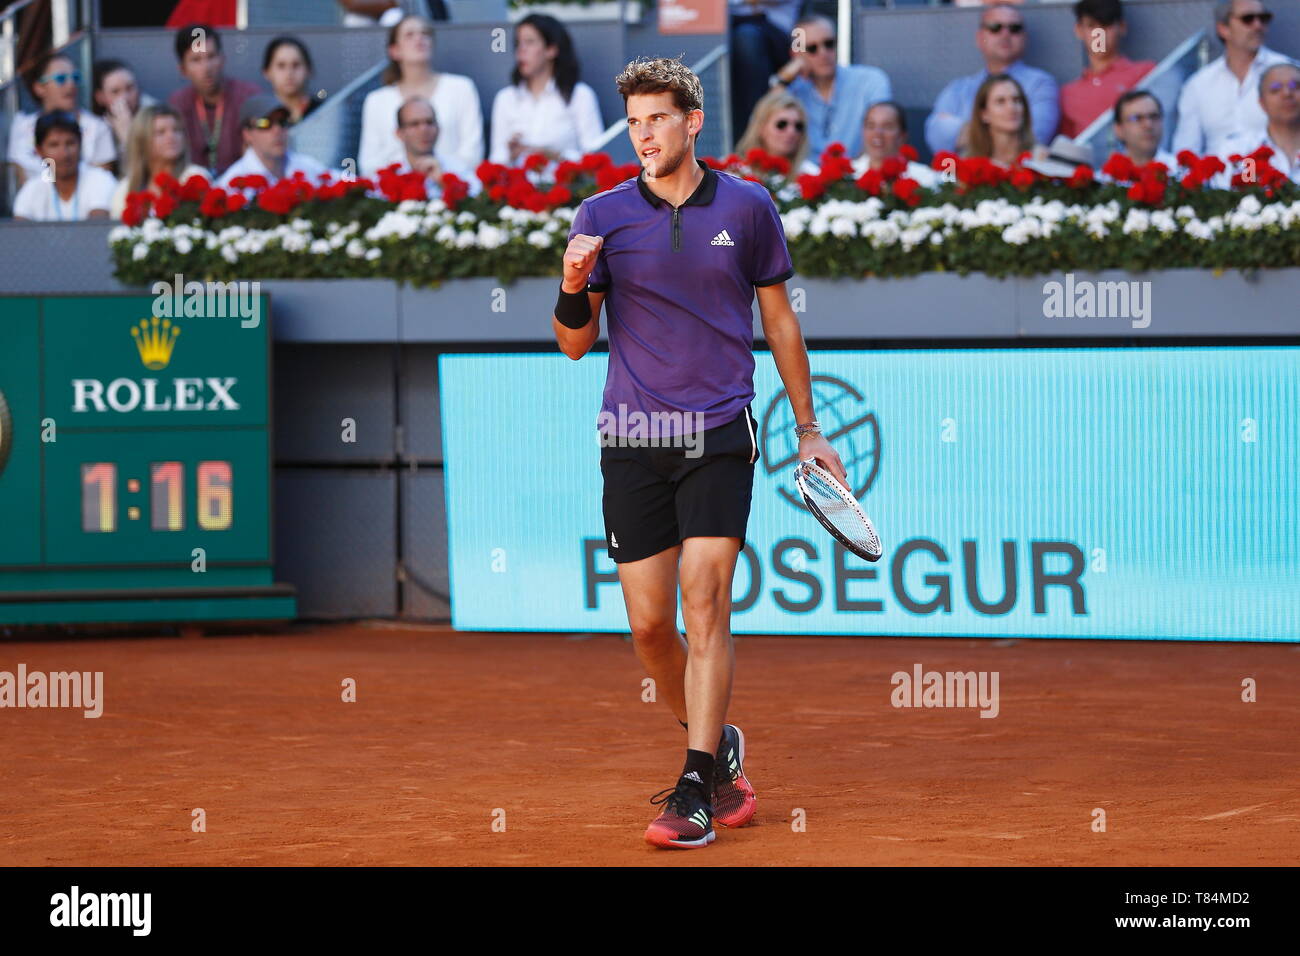 Madrid, Spain. 10th May, 2019. Dominic Thiem (AUT) Tennis : Dominic Thiem  of Austria celebrate after point during Singles Quarter final match against  Roger Federer of Switzerland on the ATP World Tour